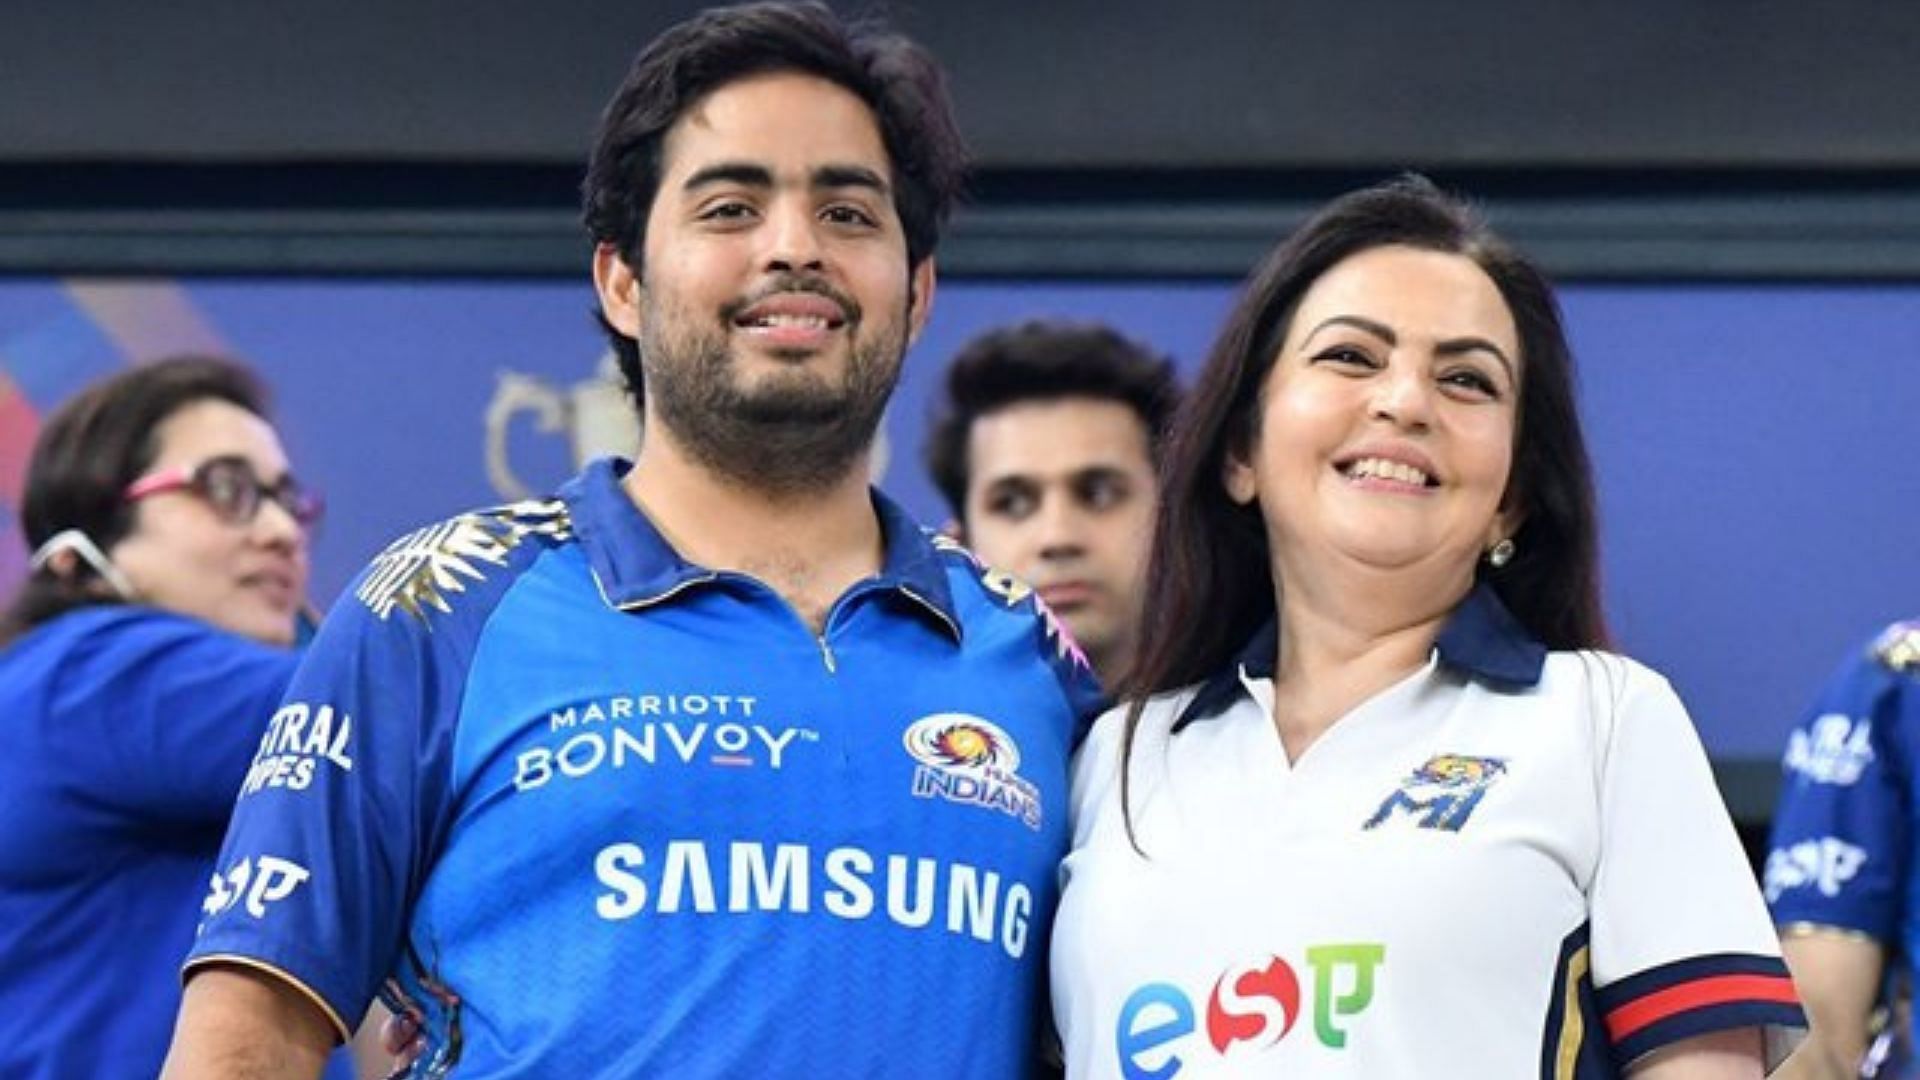 Mumbai Indians are the richest IPL franchise and it shouldn